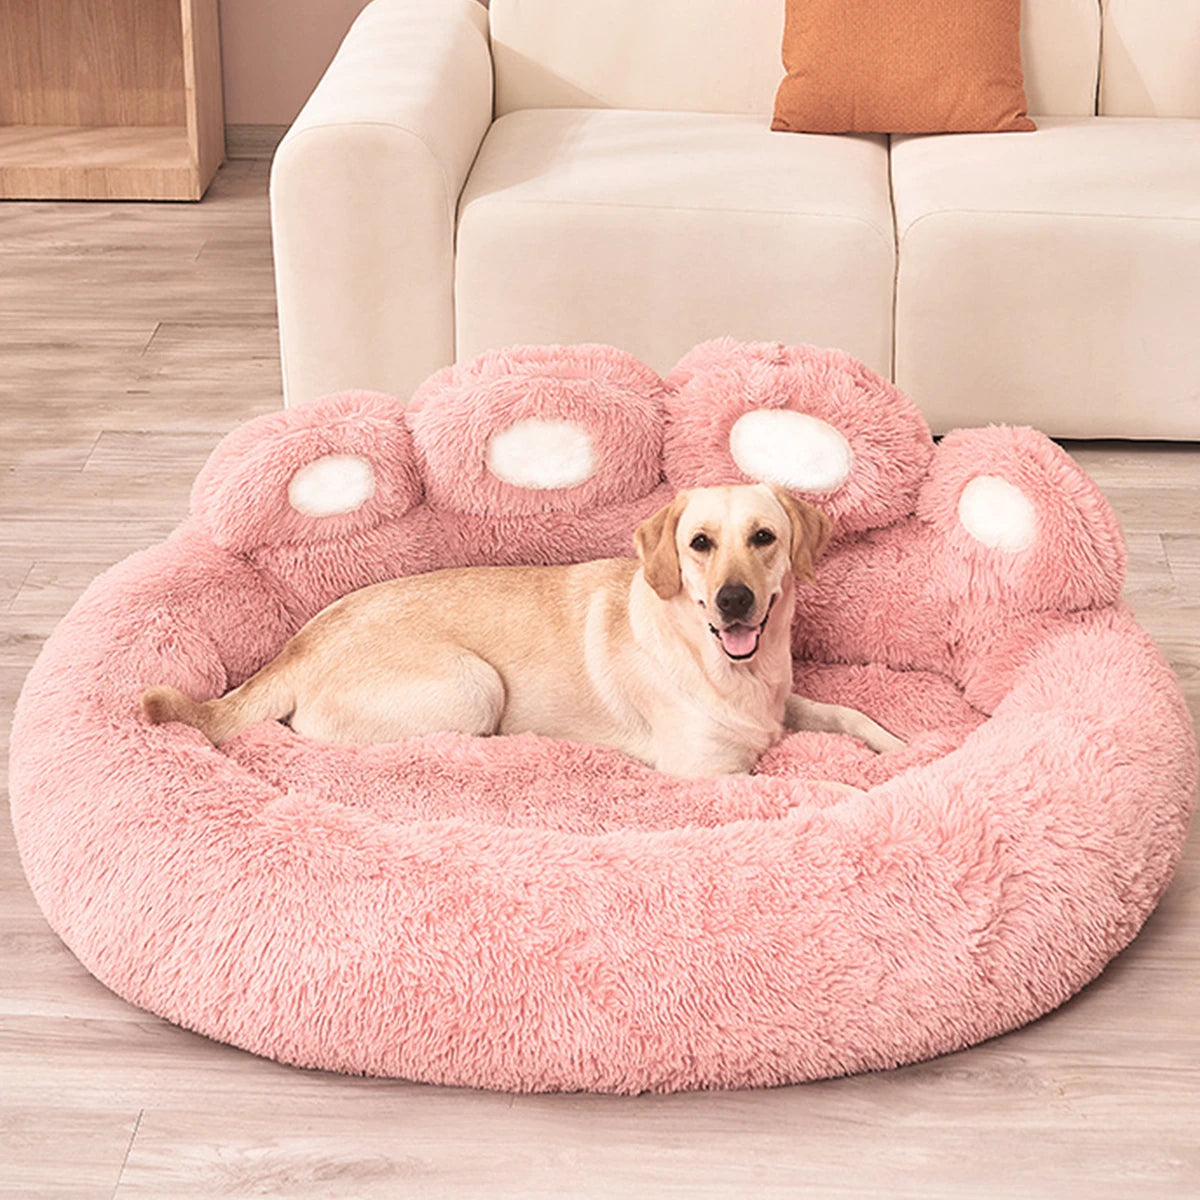 Washable plush sofa bed for 60cm dogs and cats - 3 colors